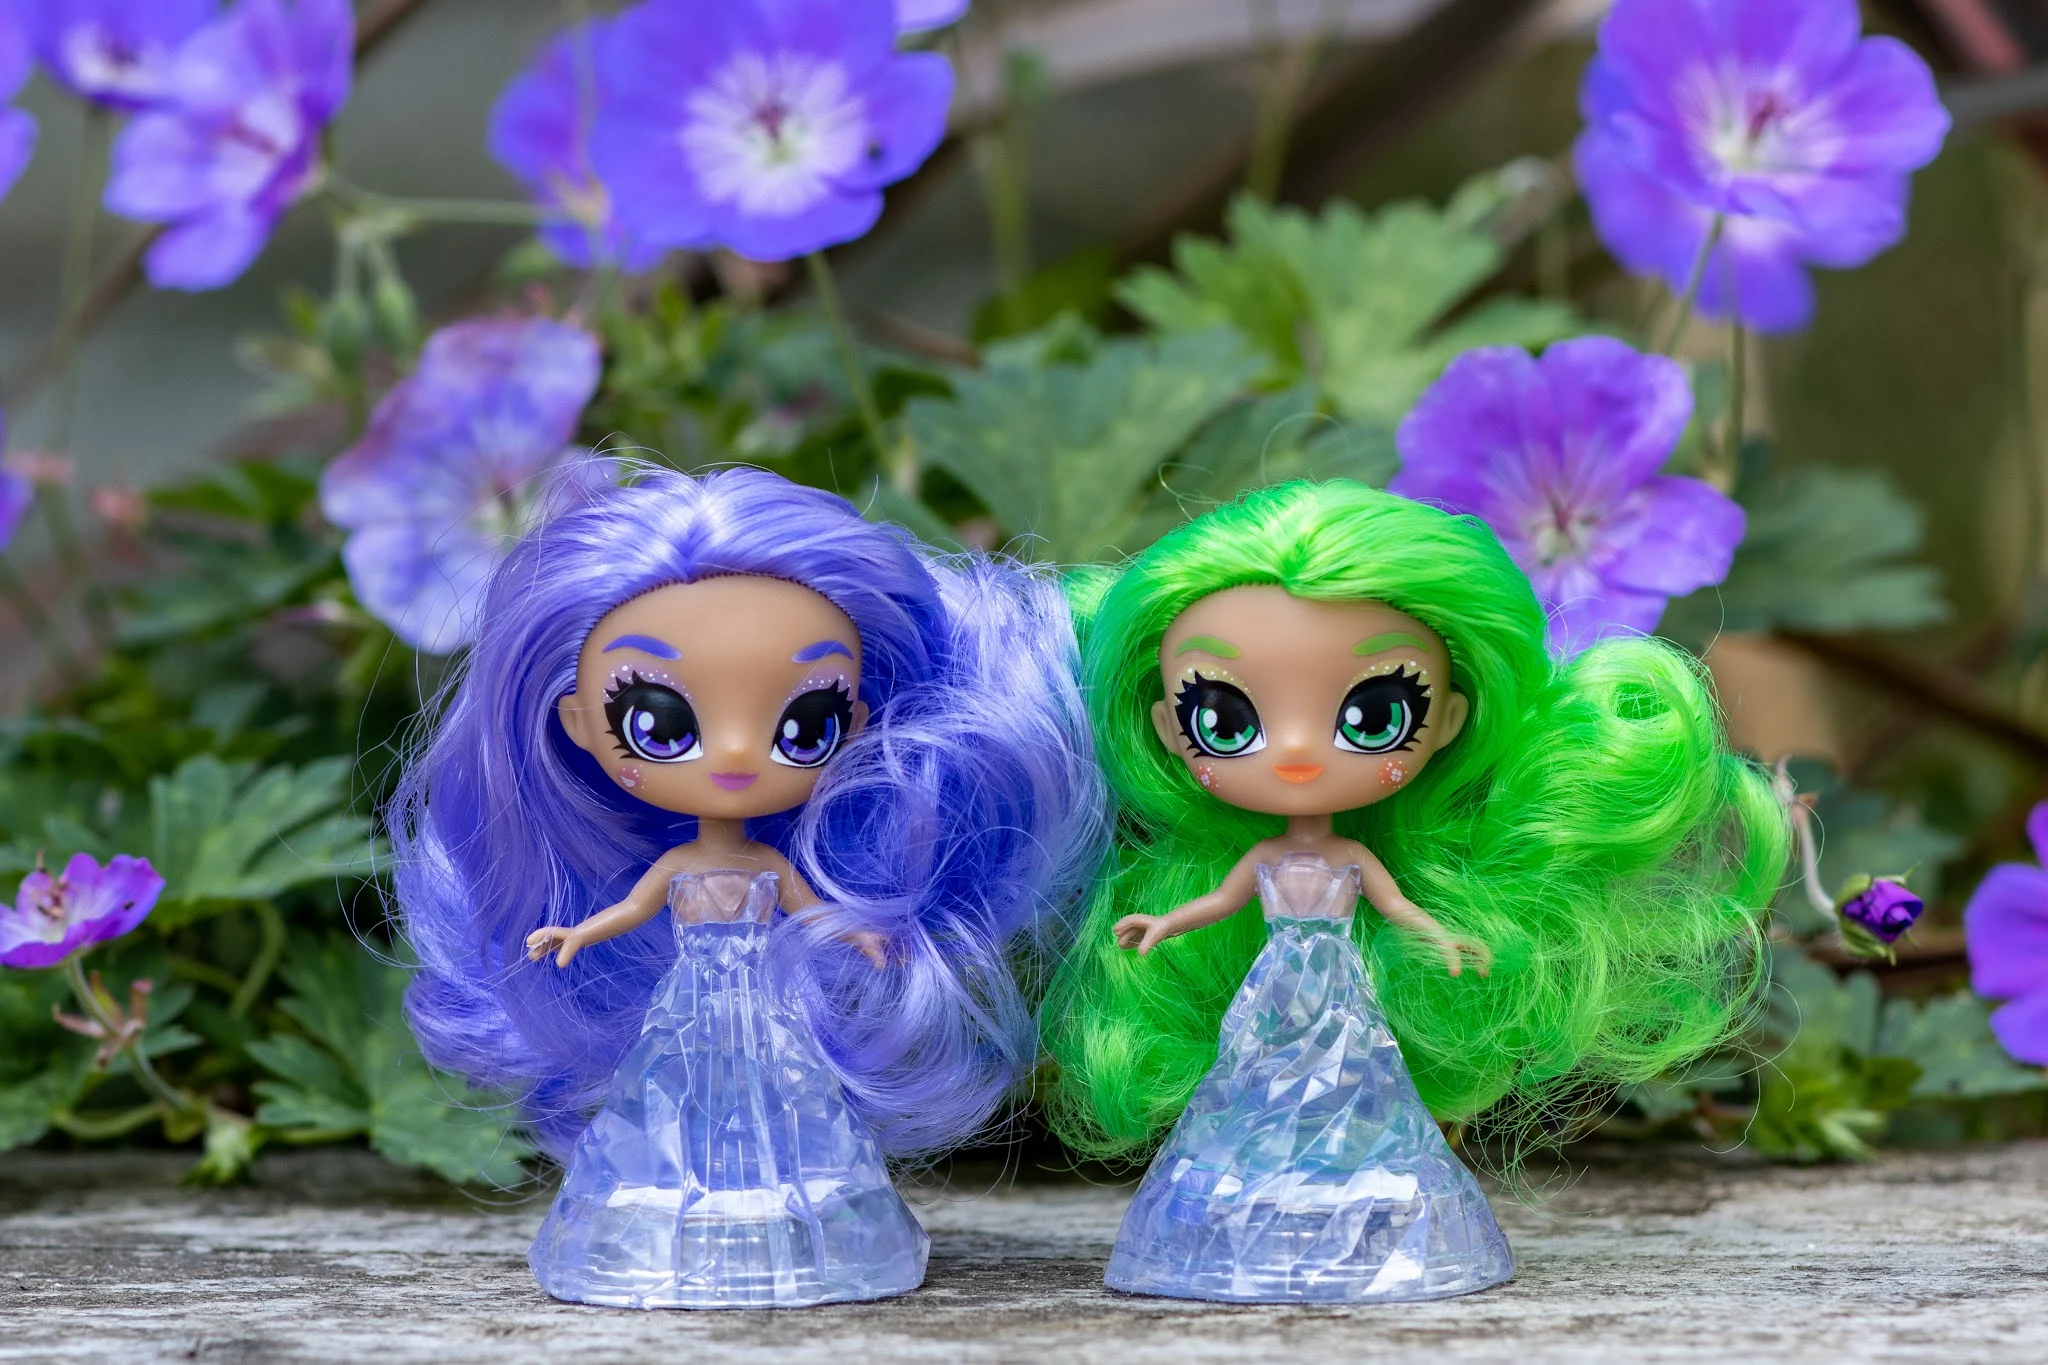 Purple haired amethyst and green haired adventurine crystalina sprite dolls next to each other